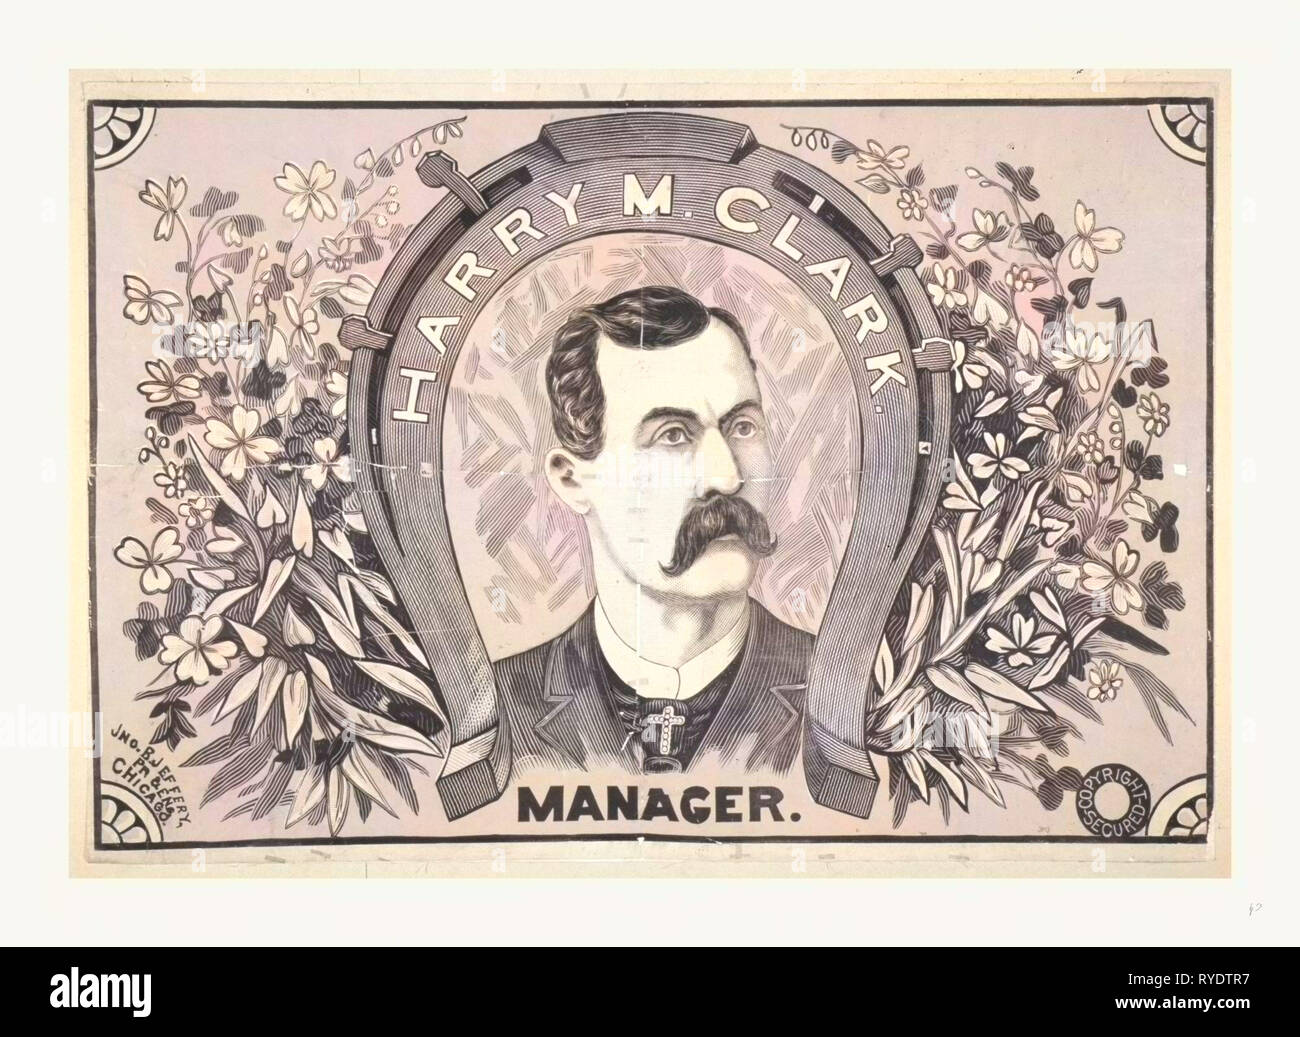 Harry M. Clark, Manager. Poster Advertising Manager of the Play, the Hidden Hand. 1884 Stock Photo